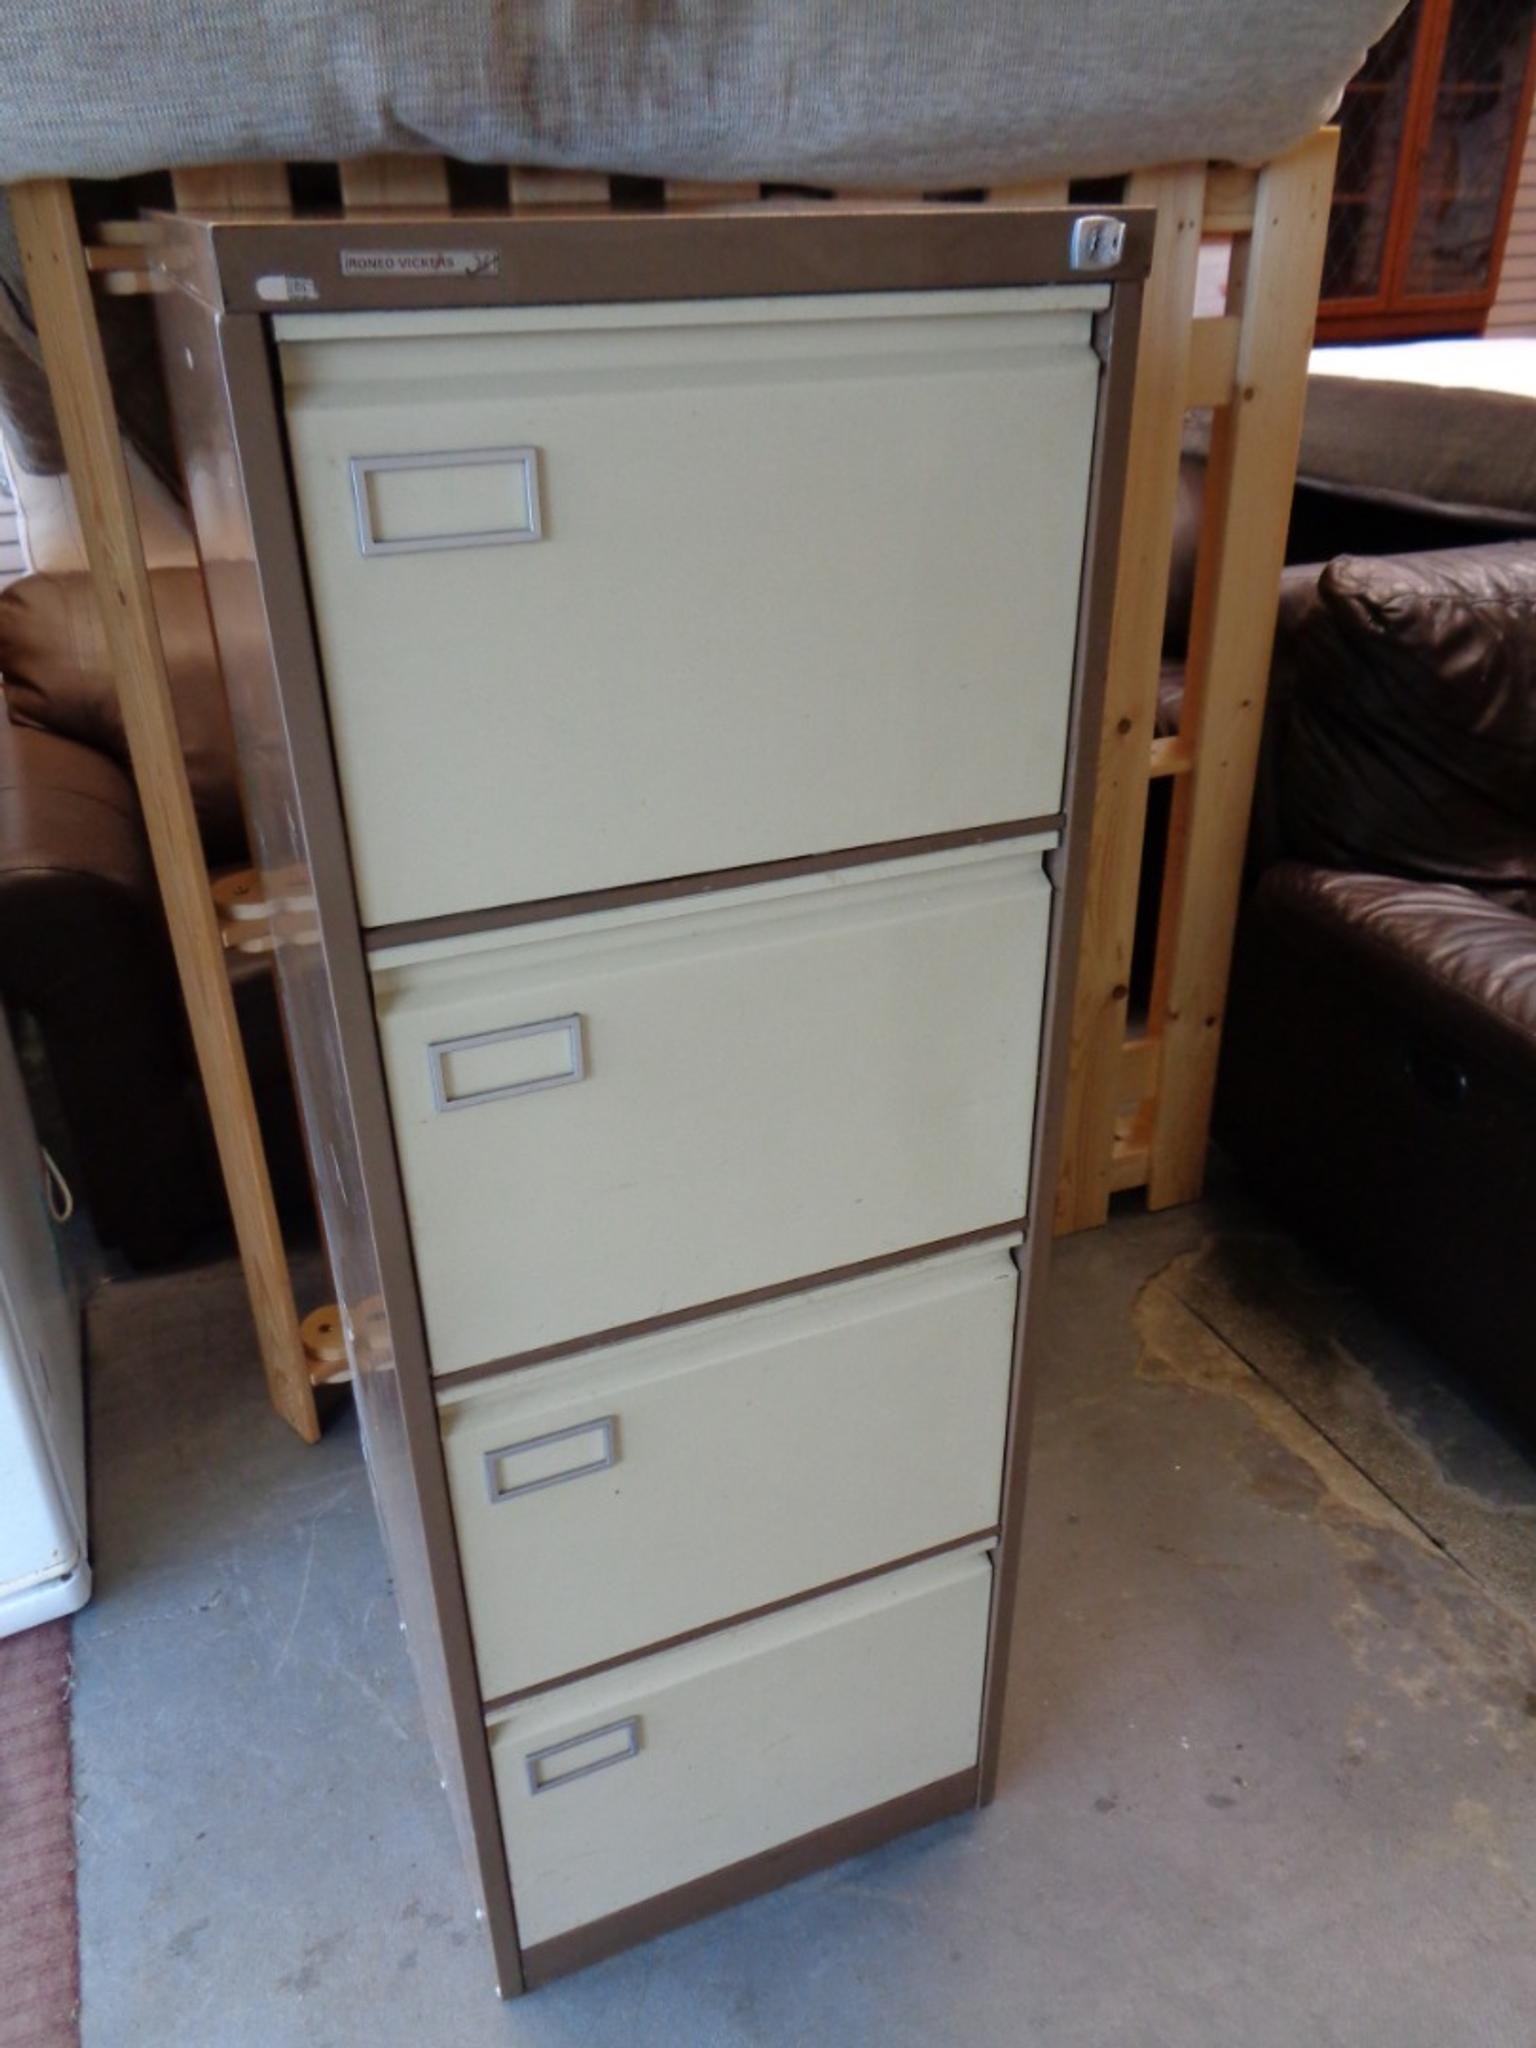 Roneo Vickers 4 Drawer Filing Cabinet W Key In S2 Sheffield For